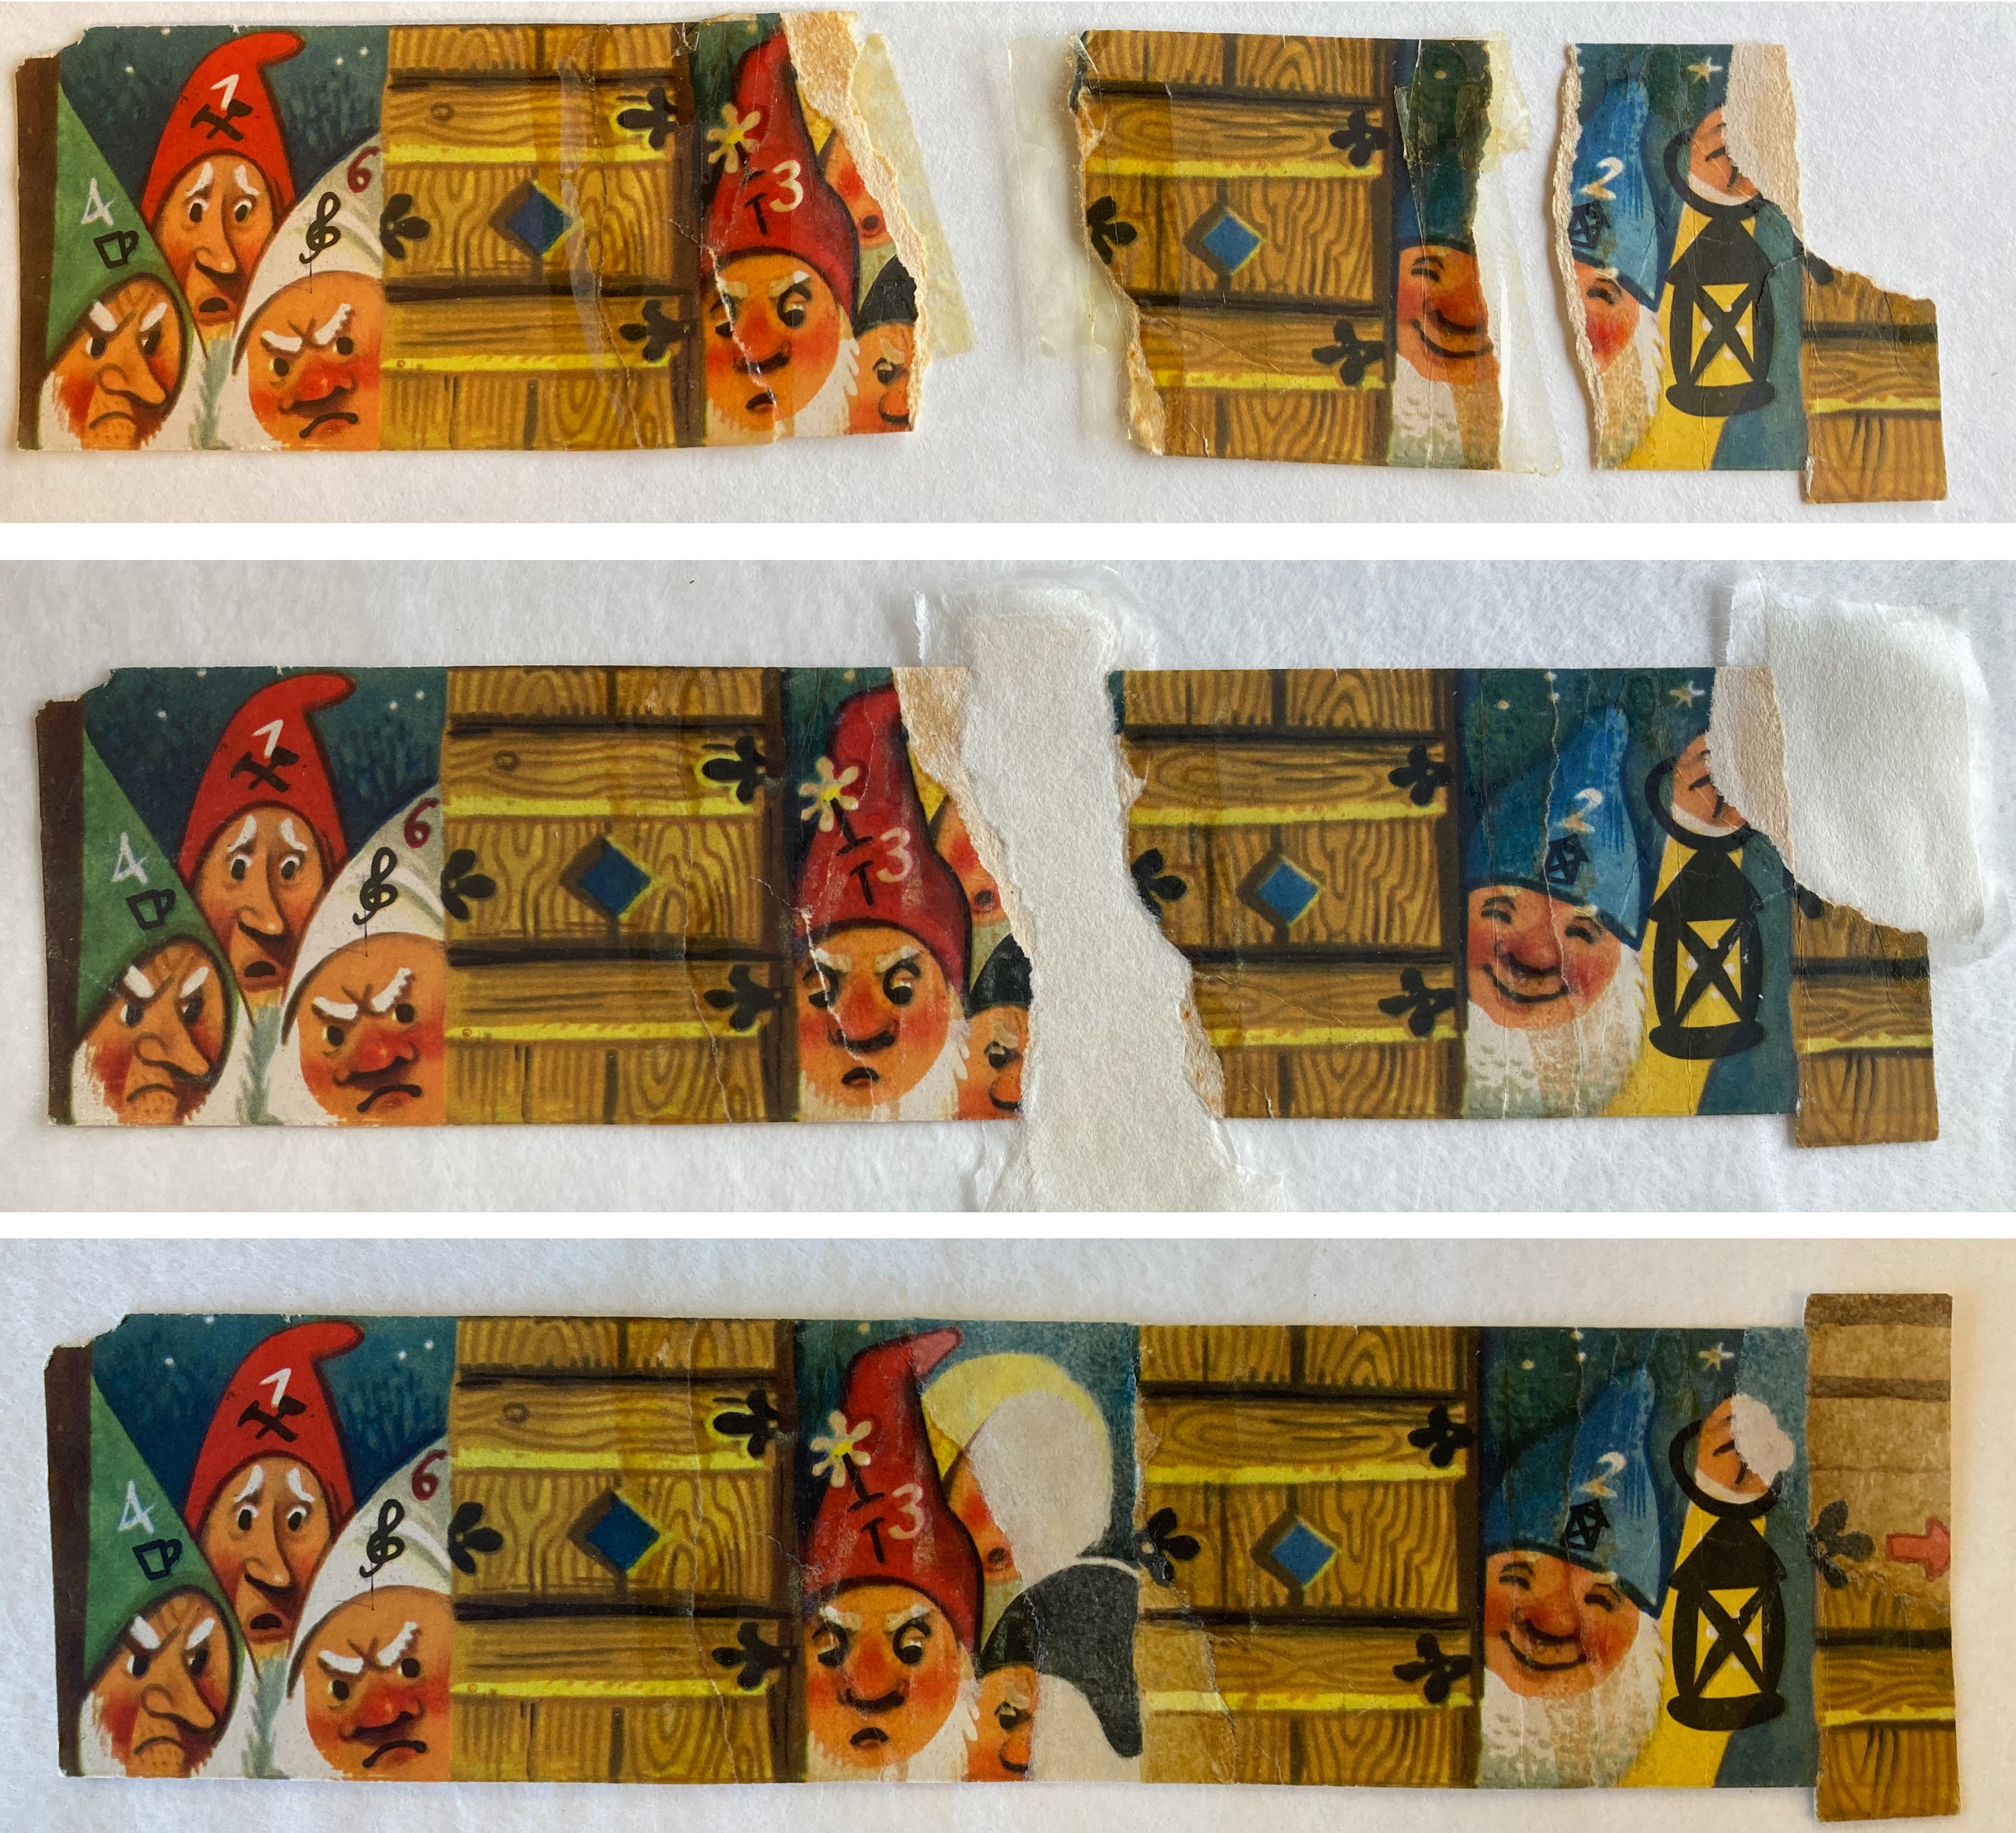 parts of a pop up book with images of dwarves in peaked caps, in different stages of repair